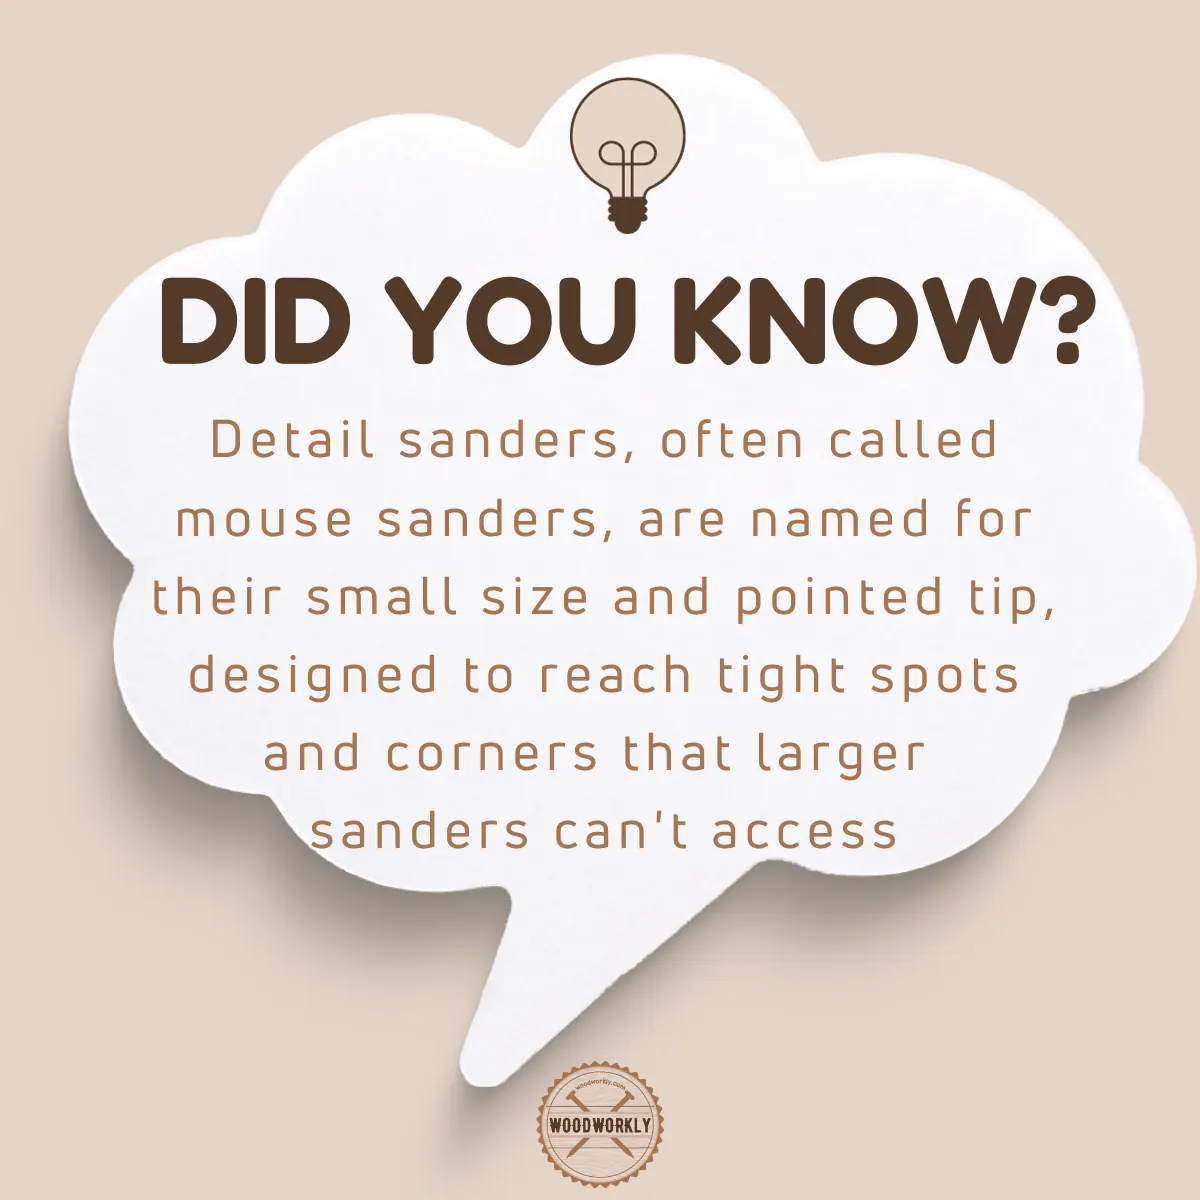 Did you know fact about detail sanders